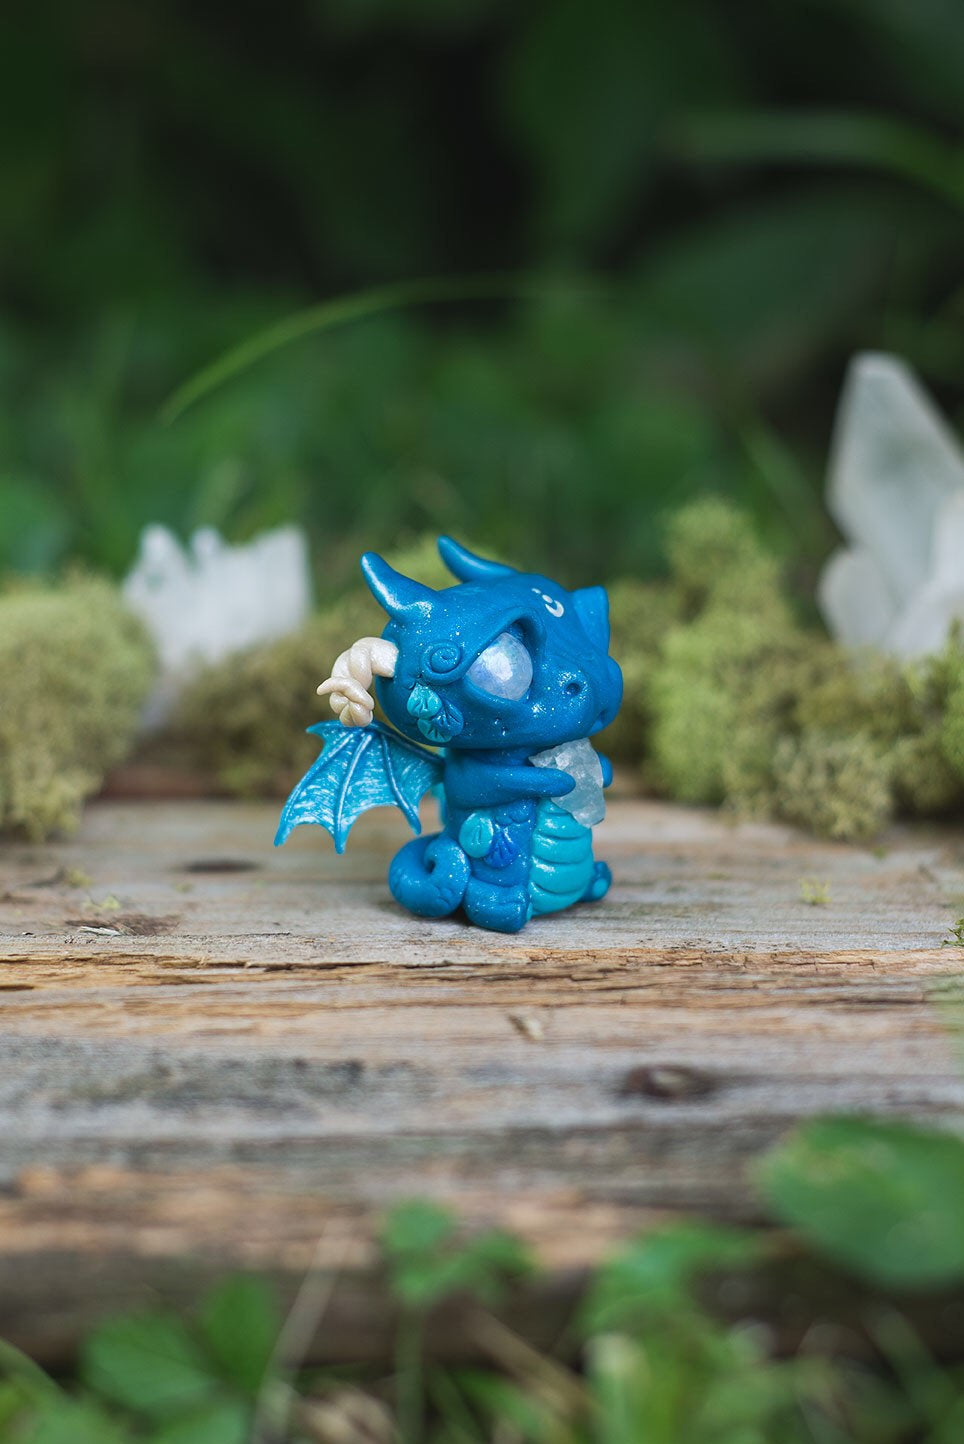 Right-Side View of Blue Dragon Mish - handmade polymer clay dragon creature with tail and wings, holding aquamarine crystal